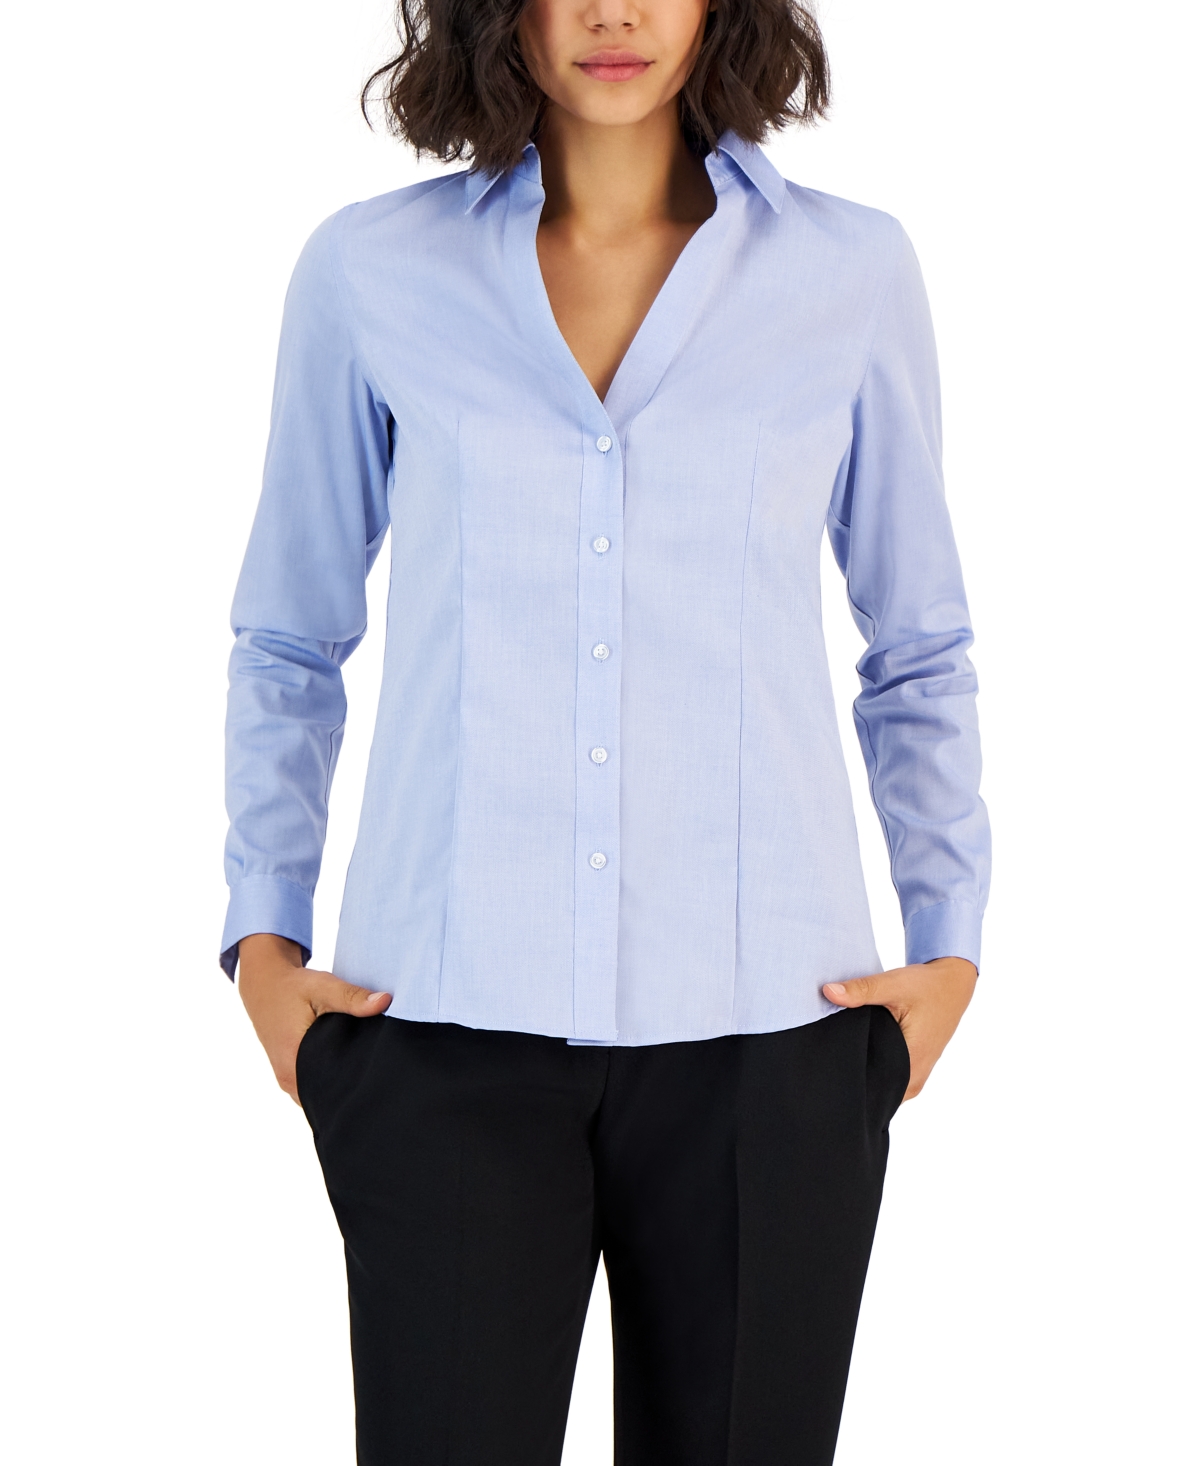 Women's Easy Care Button Up Long Sleeve Blouse - White